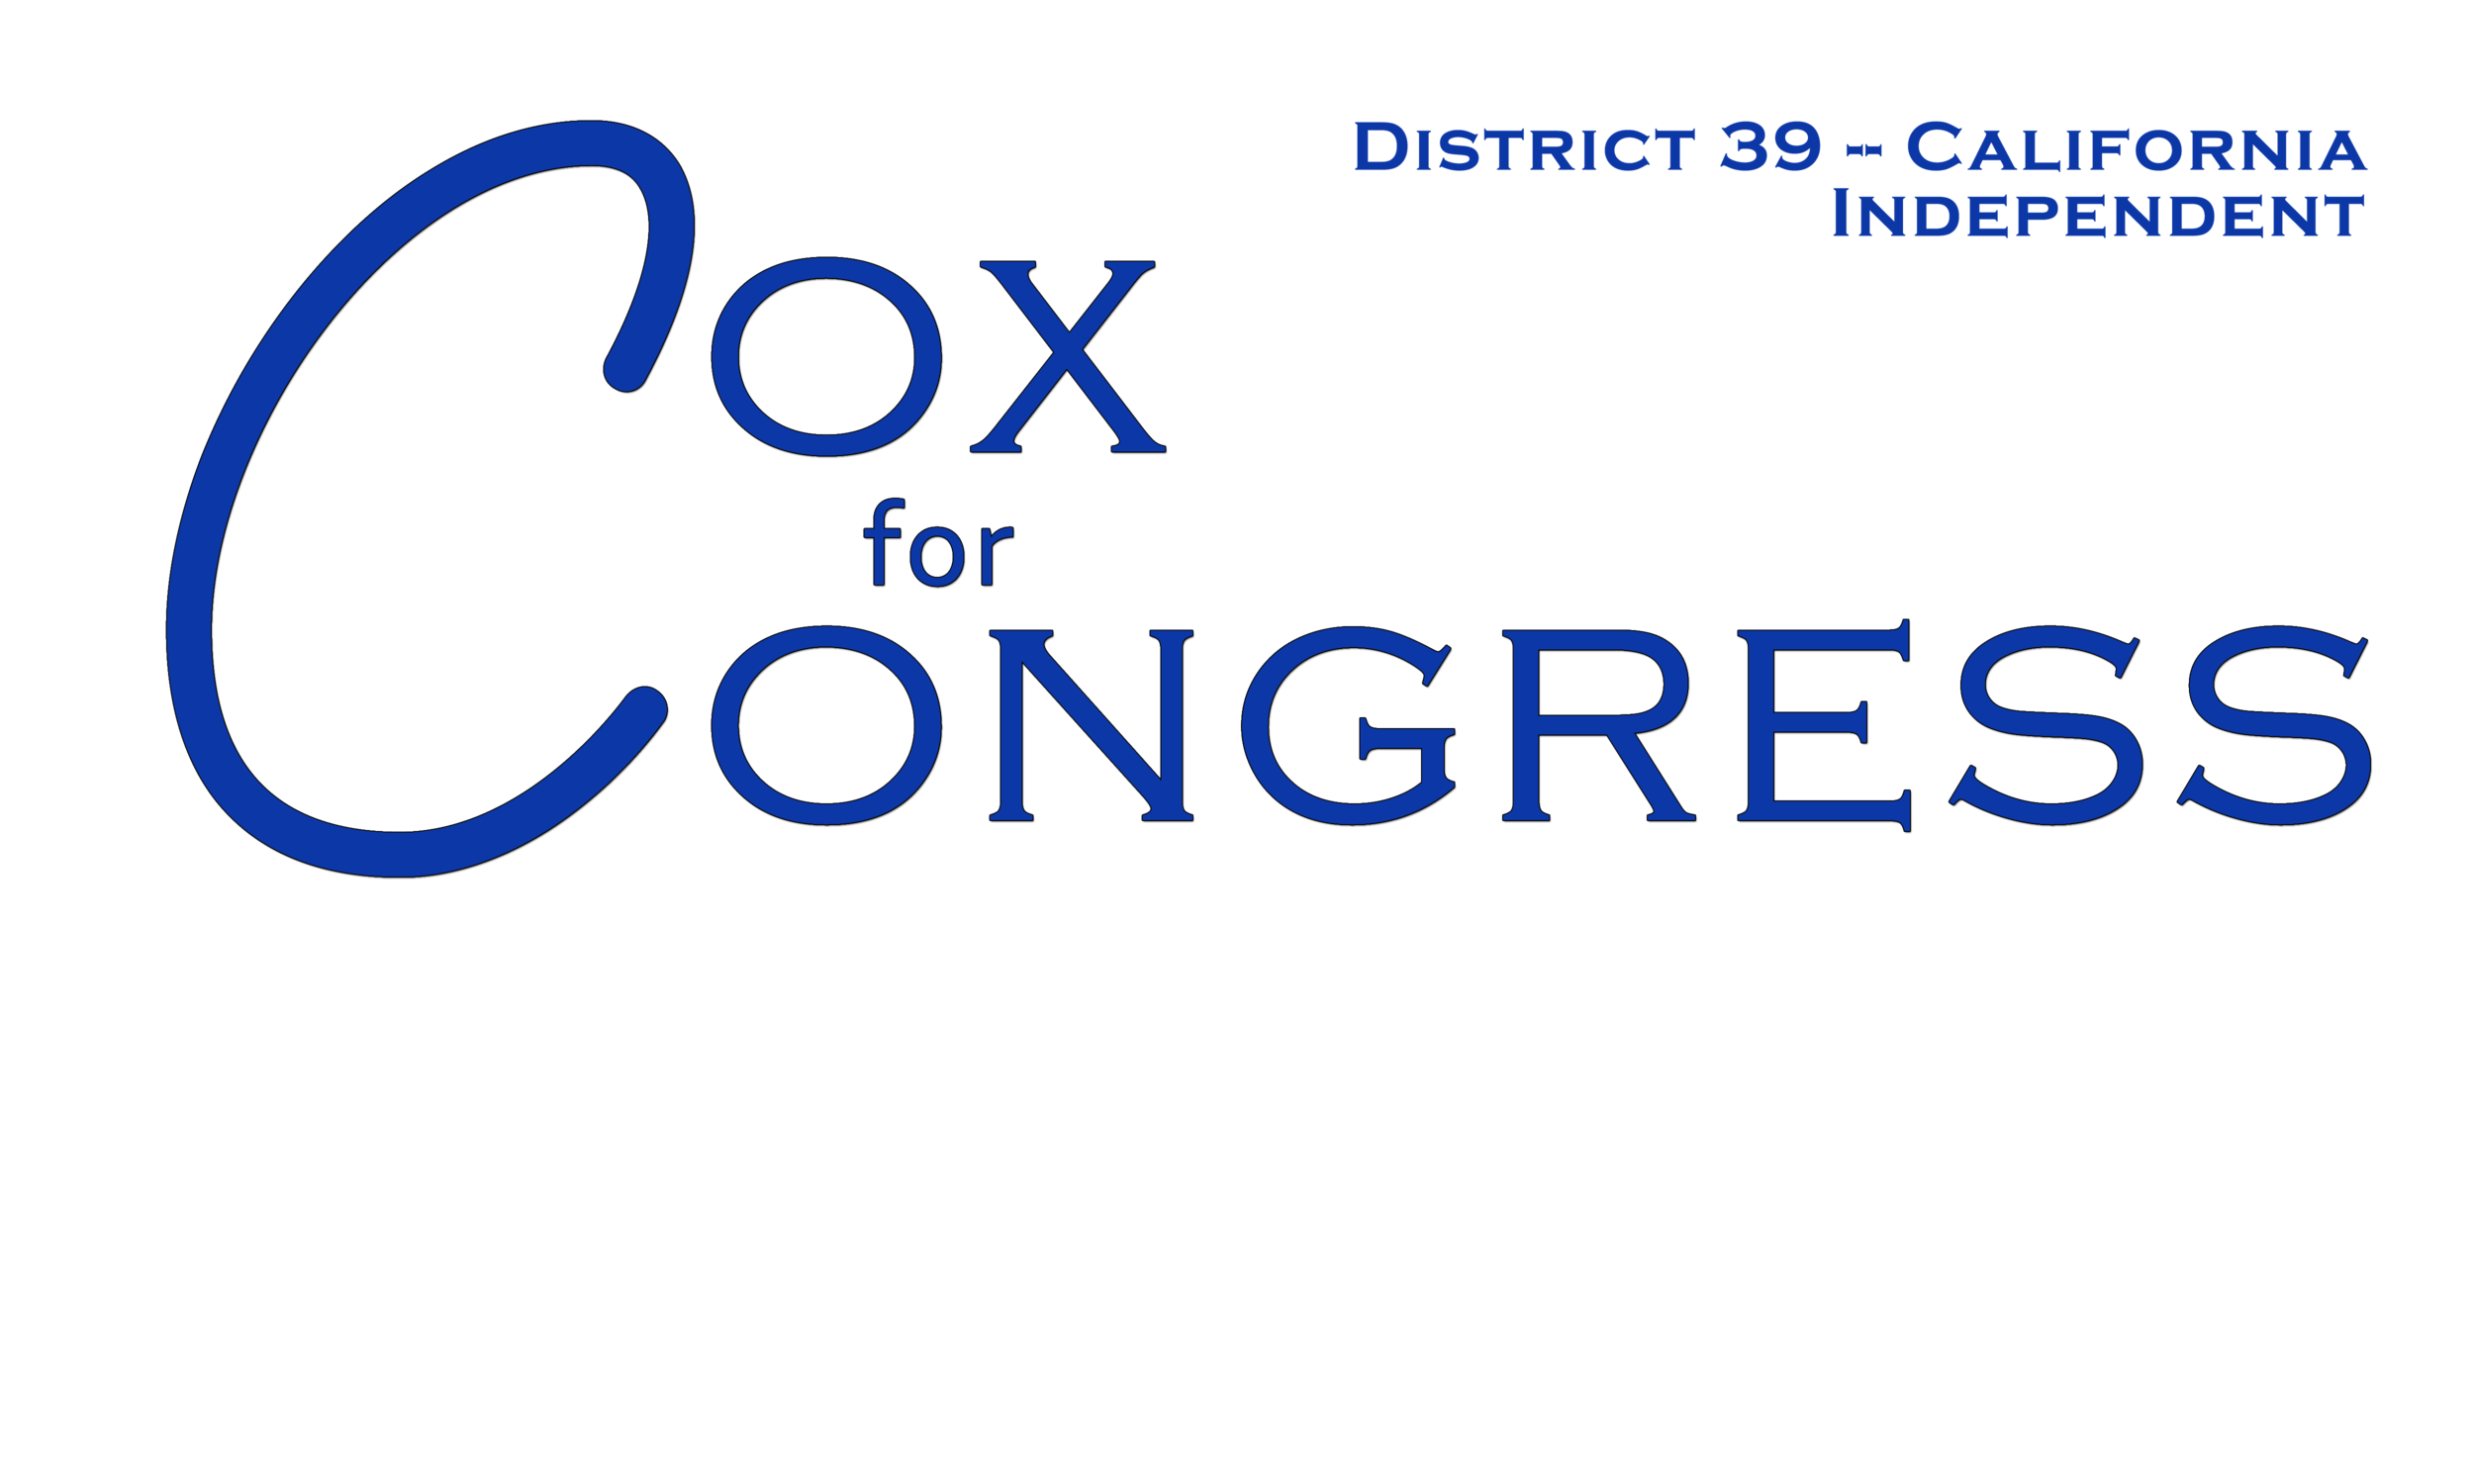 Cox for Congress